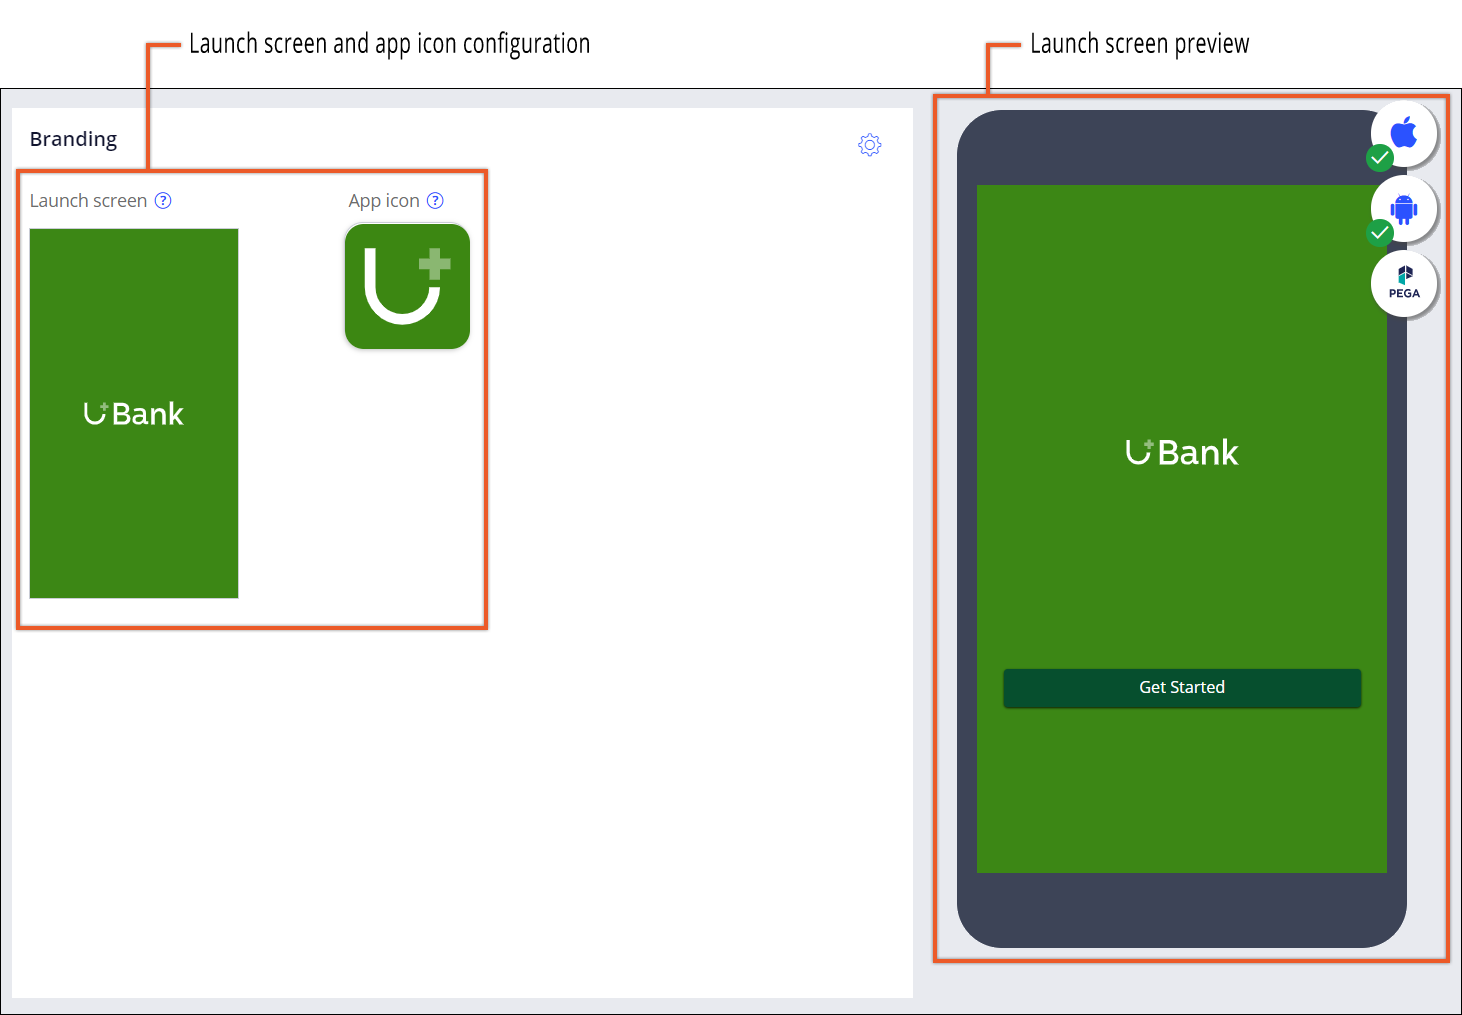 Configuring a custom launch screen and icon for a mobile app with the help of the live preview.